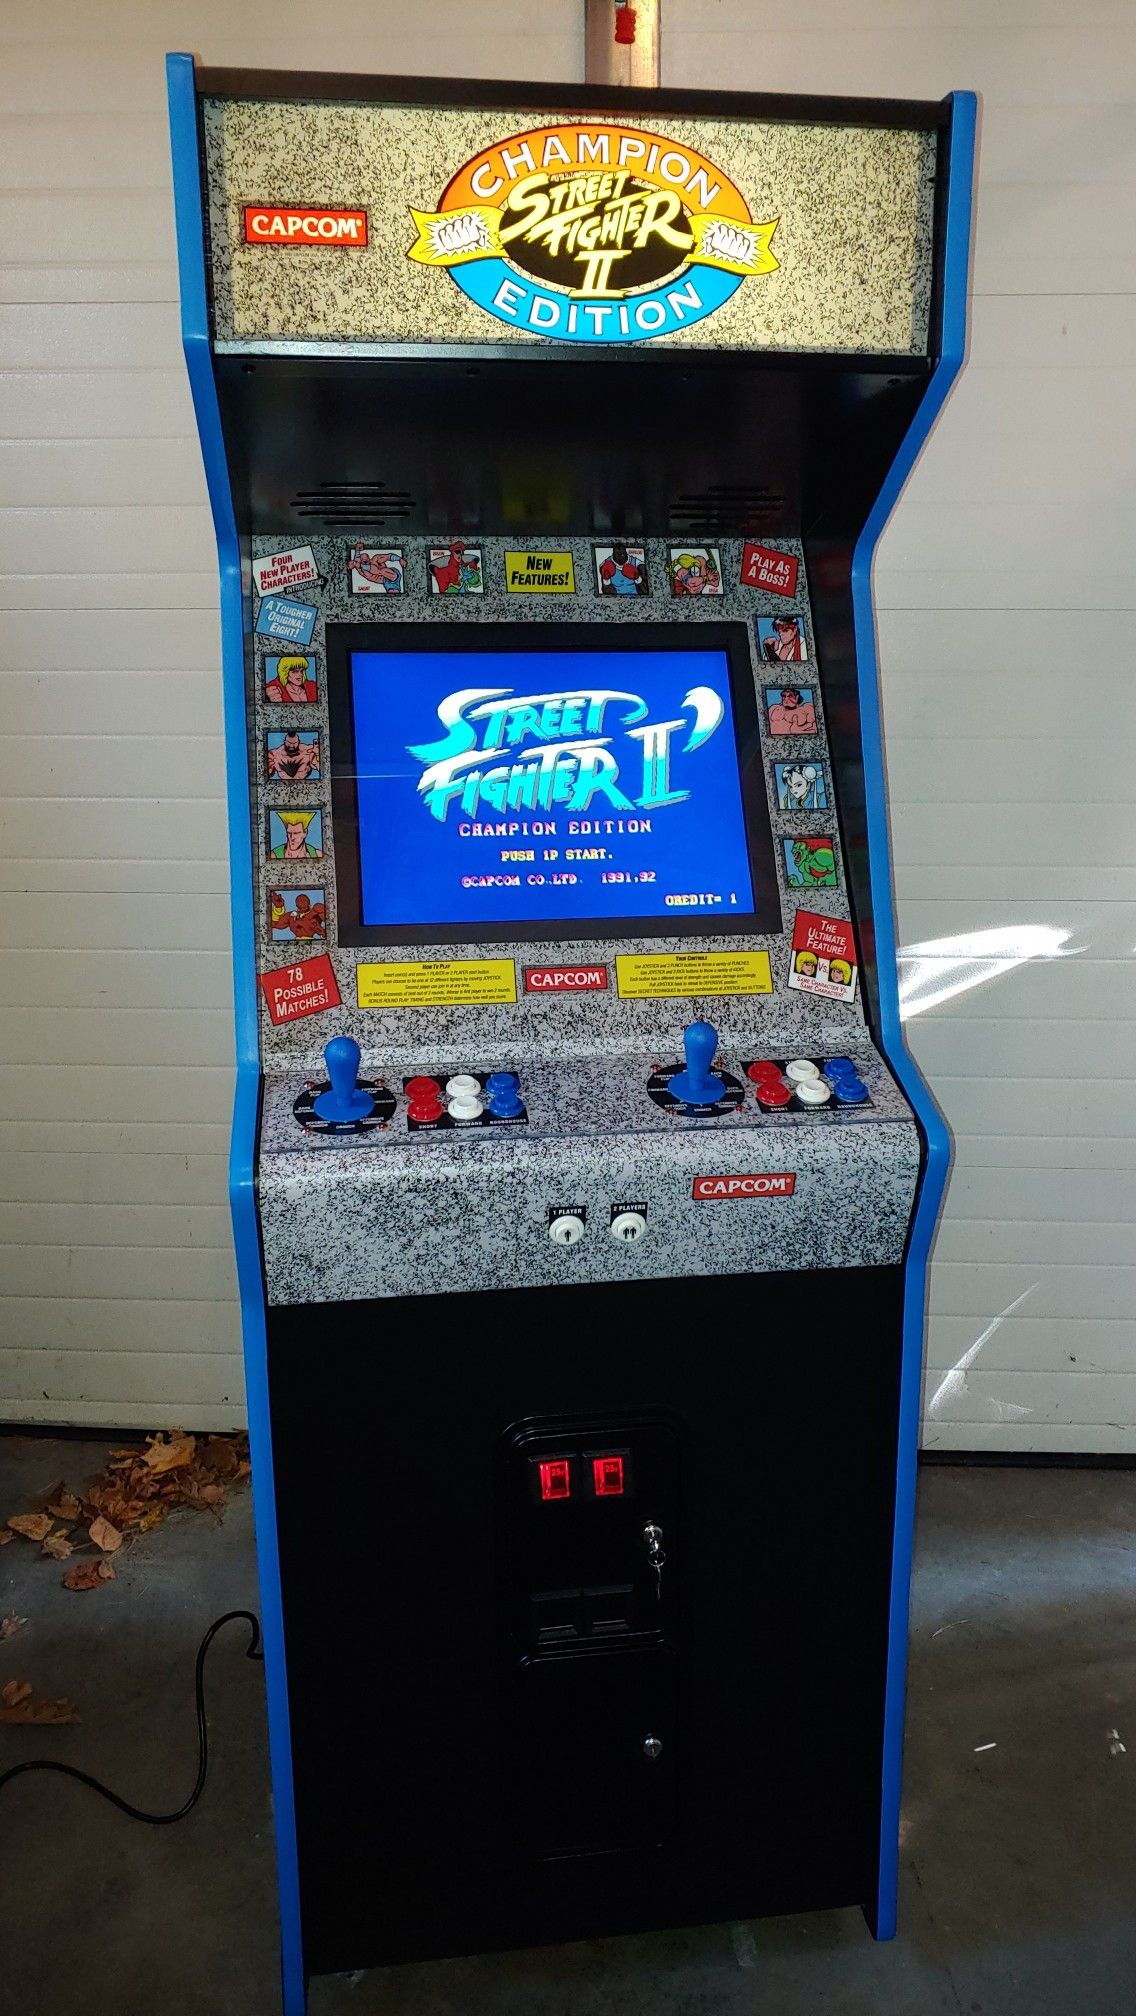 Street Fighter 2 champion edition arcade multigame plays 1300 games